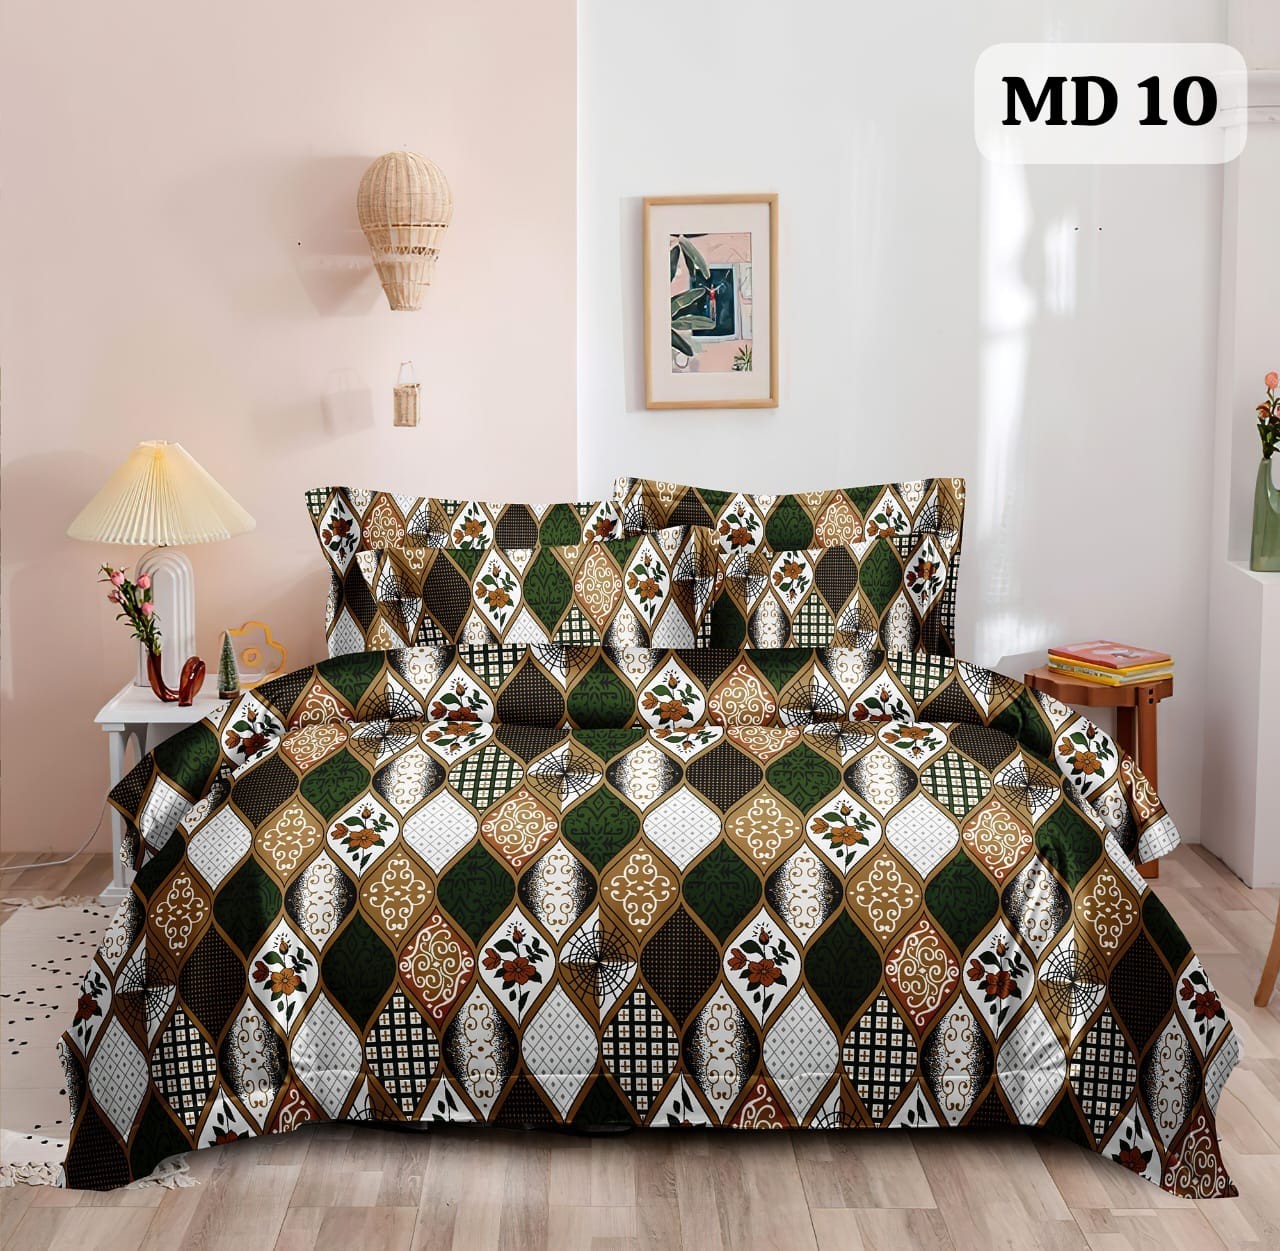 Stylish And High Quality Fashionable Twill Cotton Bed Sheet